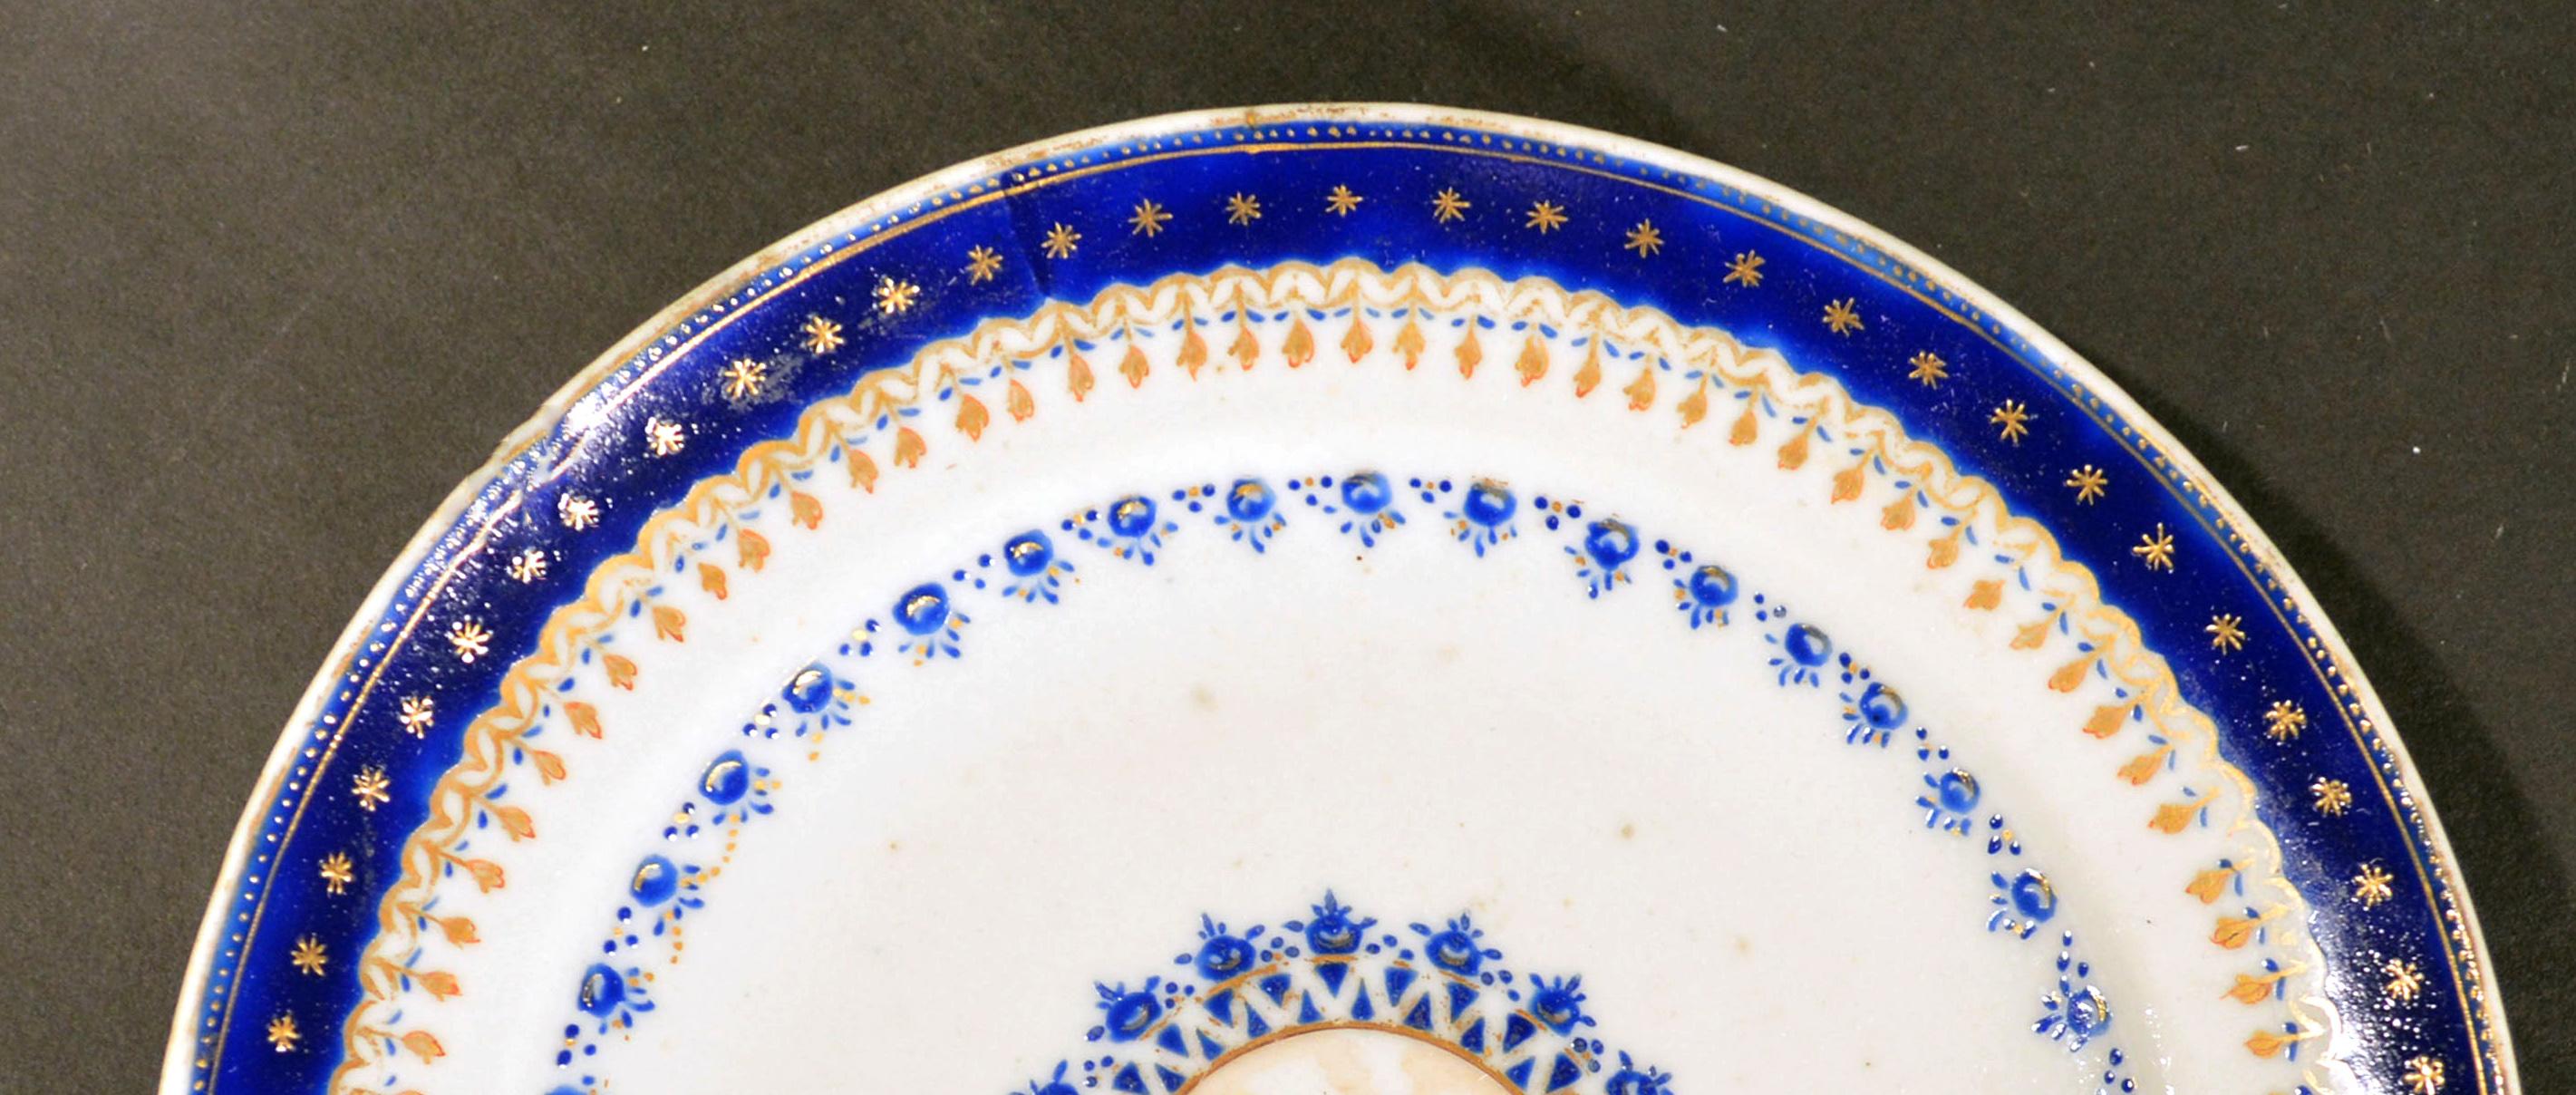 Chinese export Porcelain blue enamel plate made for the American Market, 
circa 1785.

The small Chinese Export American-market plate has a central roundel in brown depicting an, as yet group of unidentified large Federal-style buildings, in a